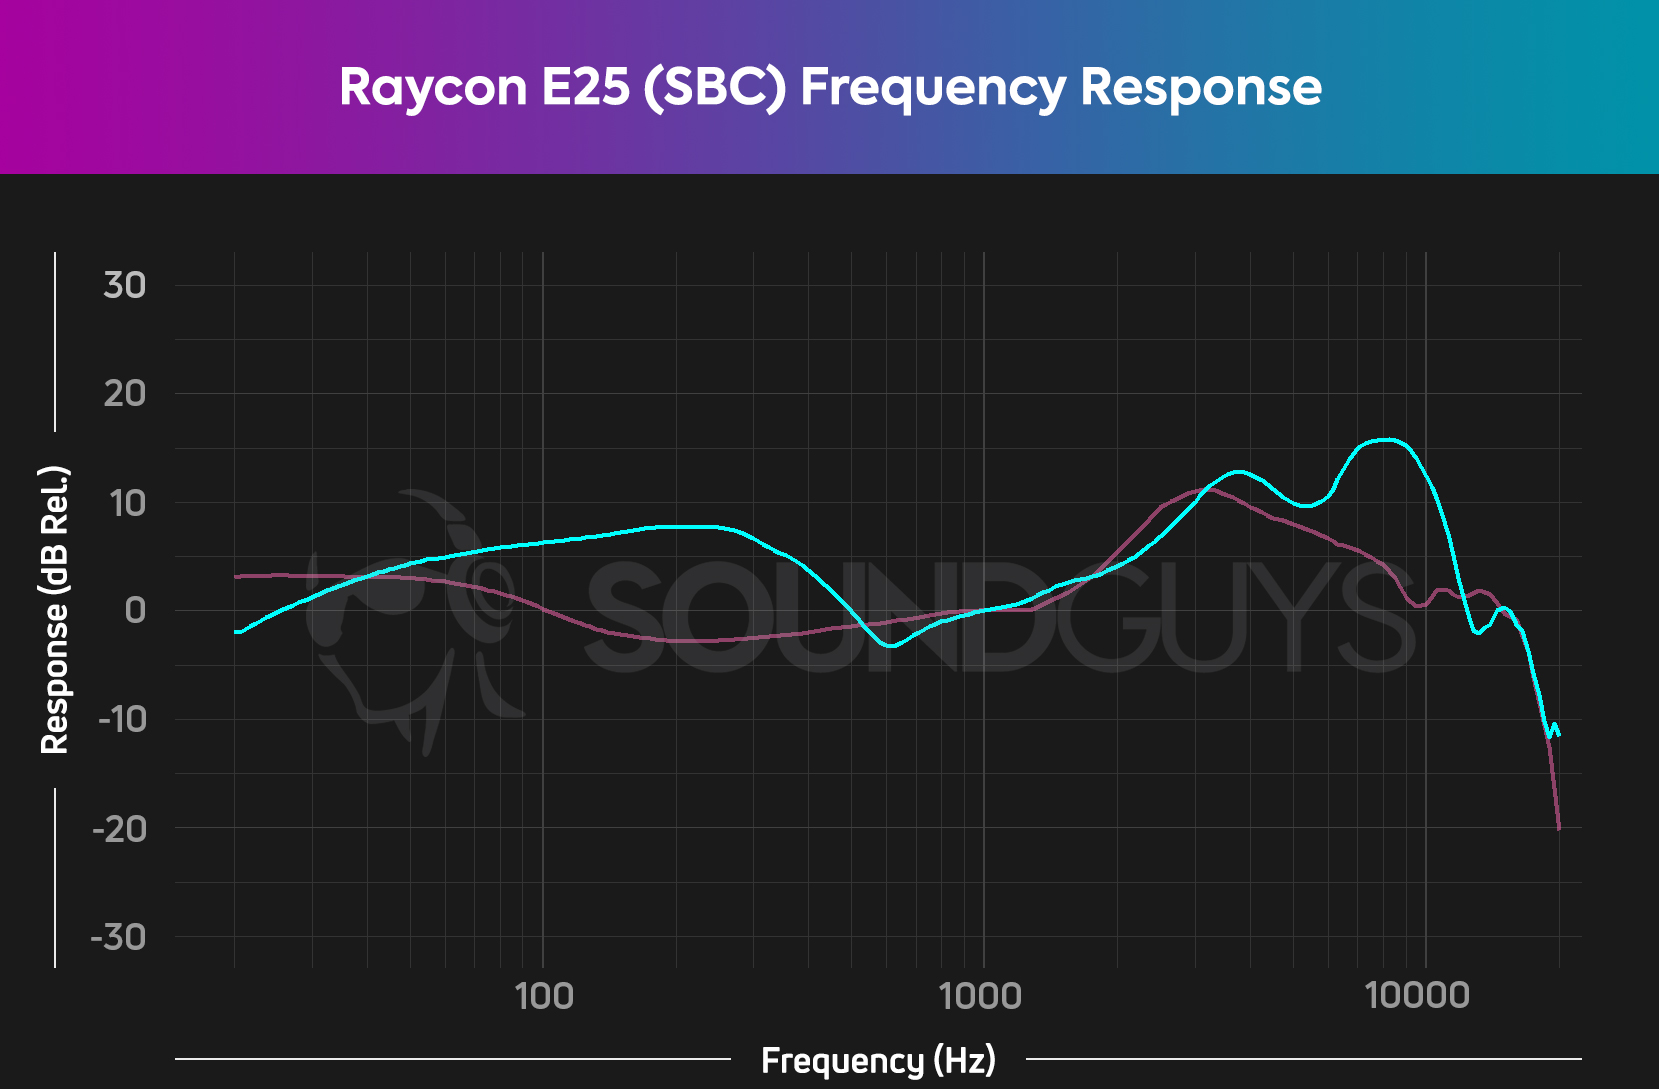 A chart showing the frequency response of the Raycon E25 